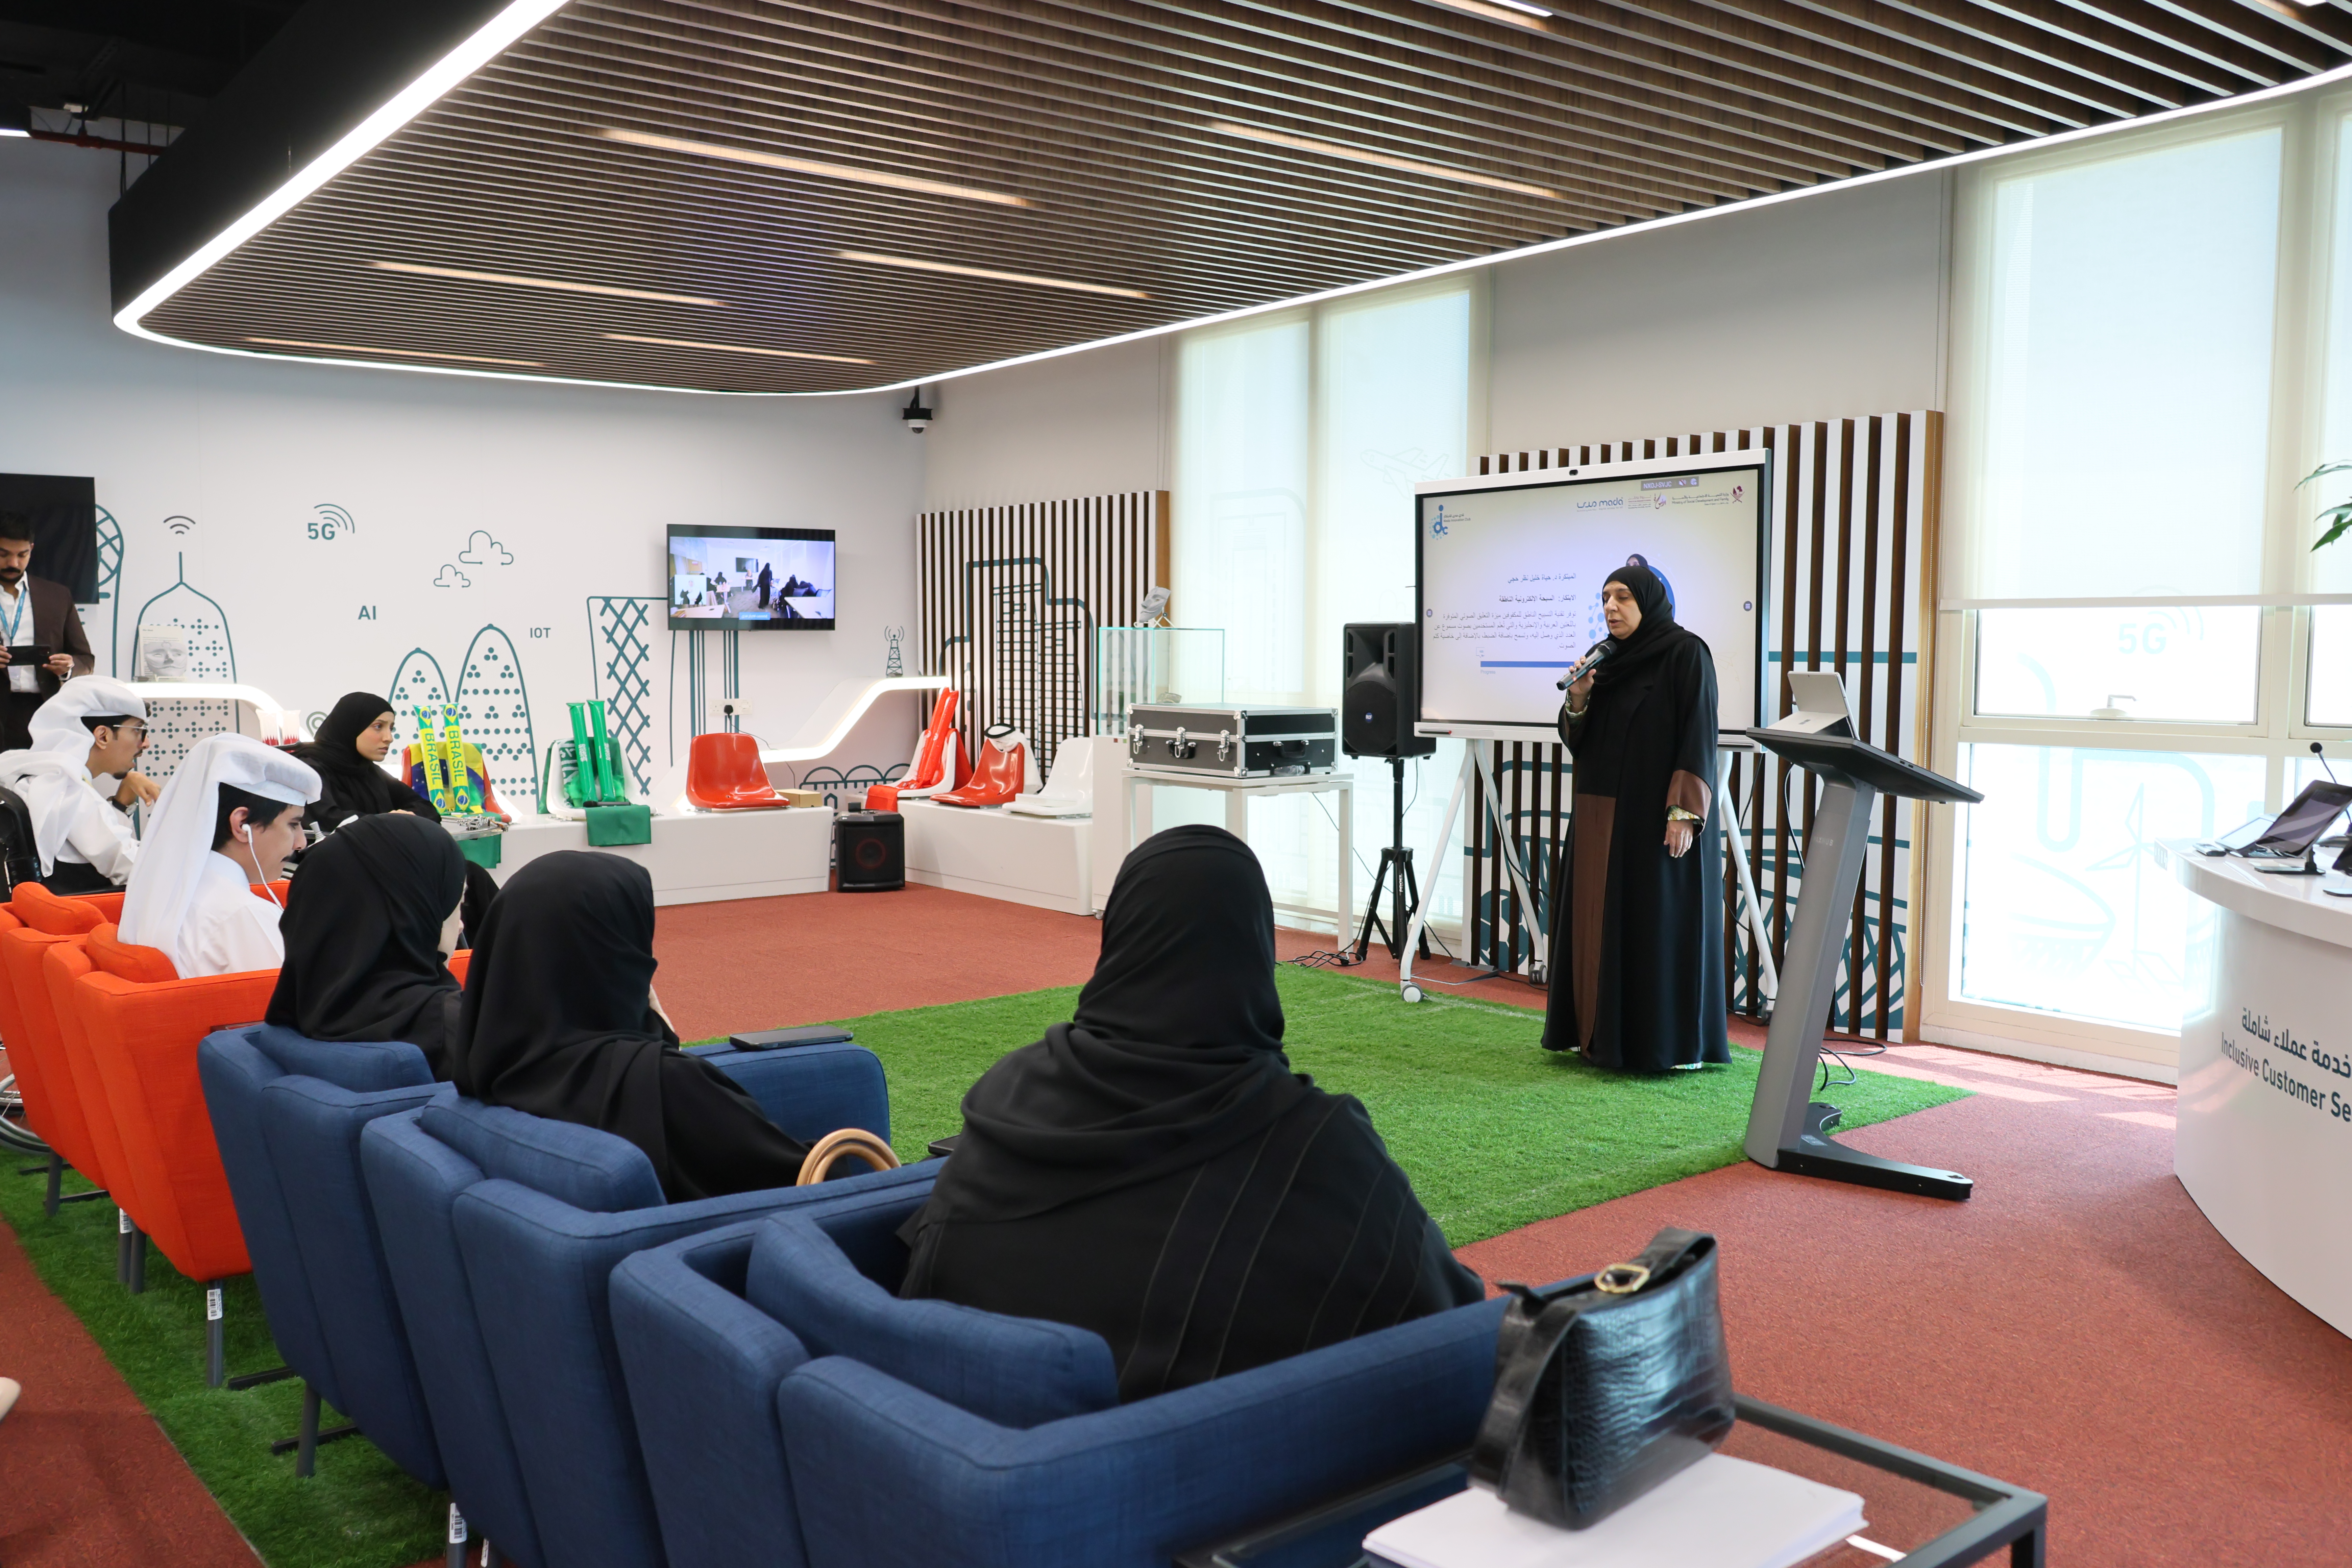 Ministry of Social Development and Family Organizes "You Can" Workshop for Innovators and Creators of the Center for Assisted Technology (Mada).